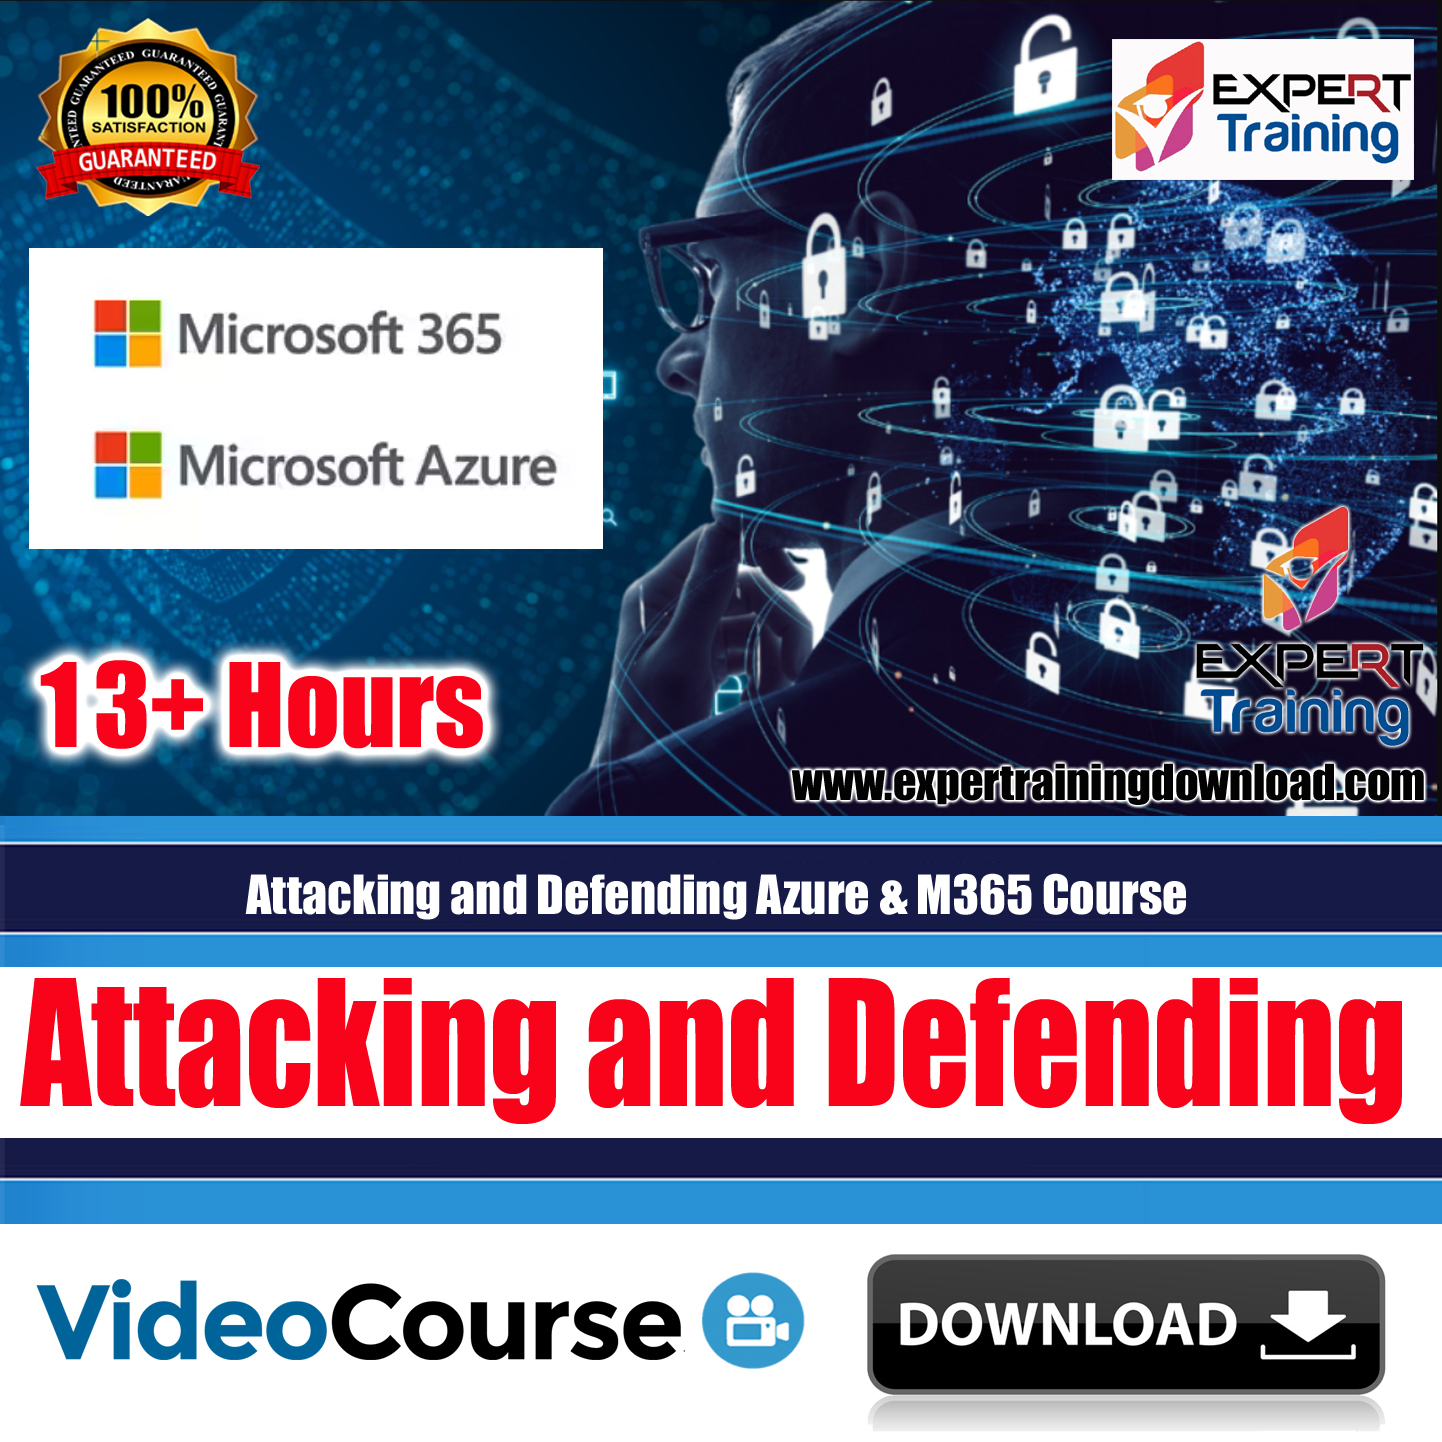 Attacking and Defending Azure & M365 Course